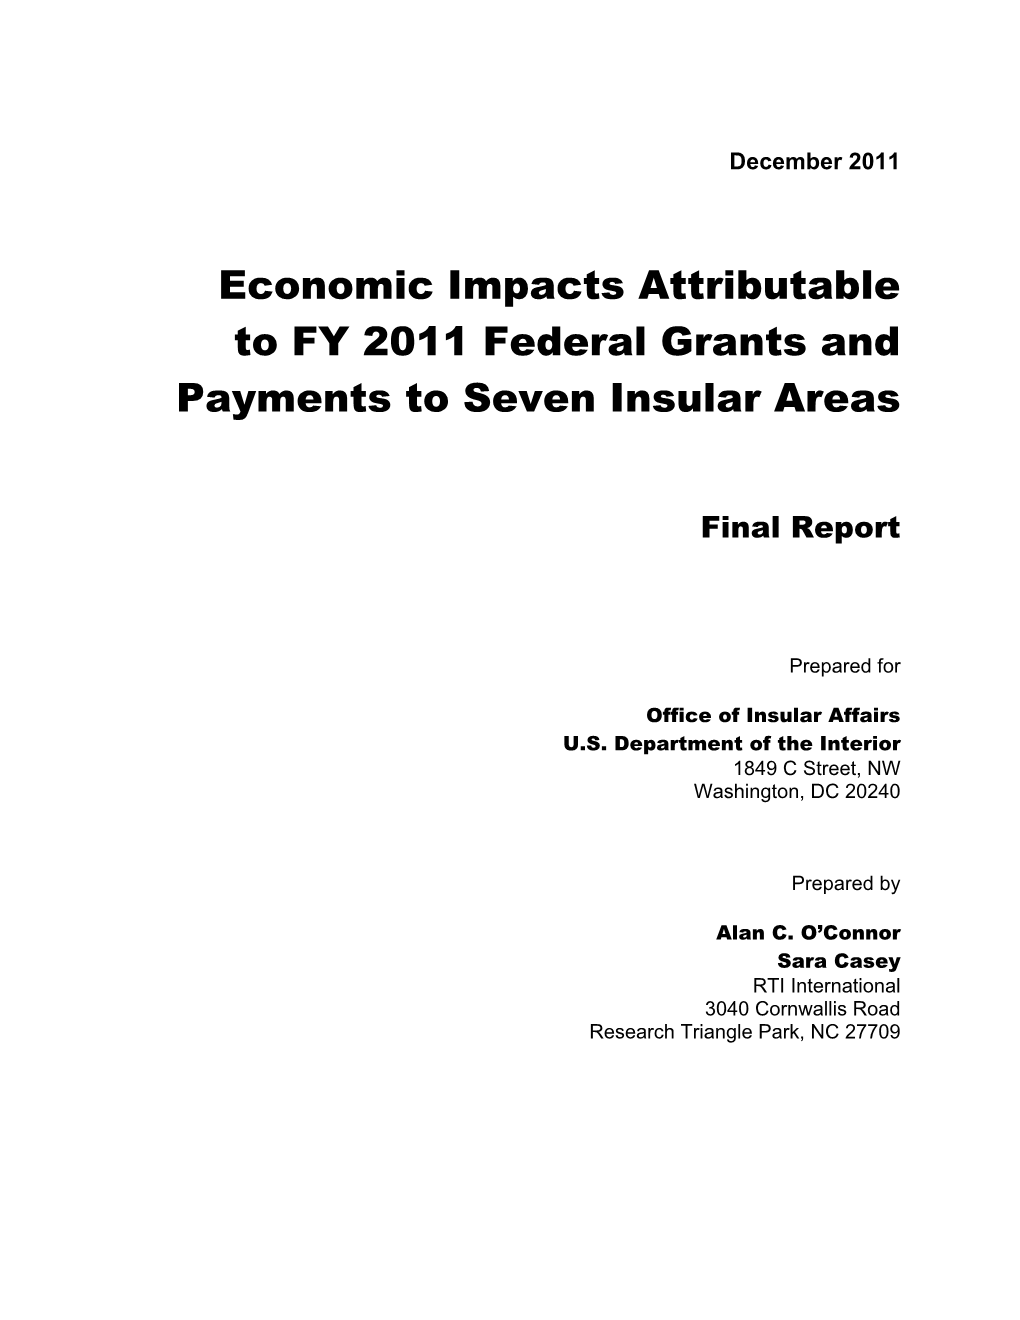 Economic Impacts Attributable to FY 2011 Federal Grants and Payments to Seven Insular Areas